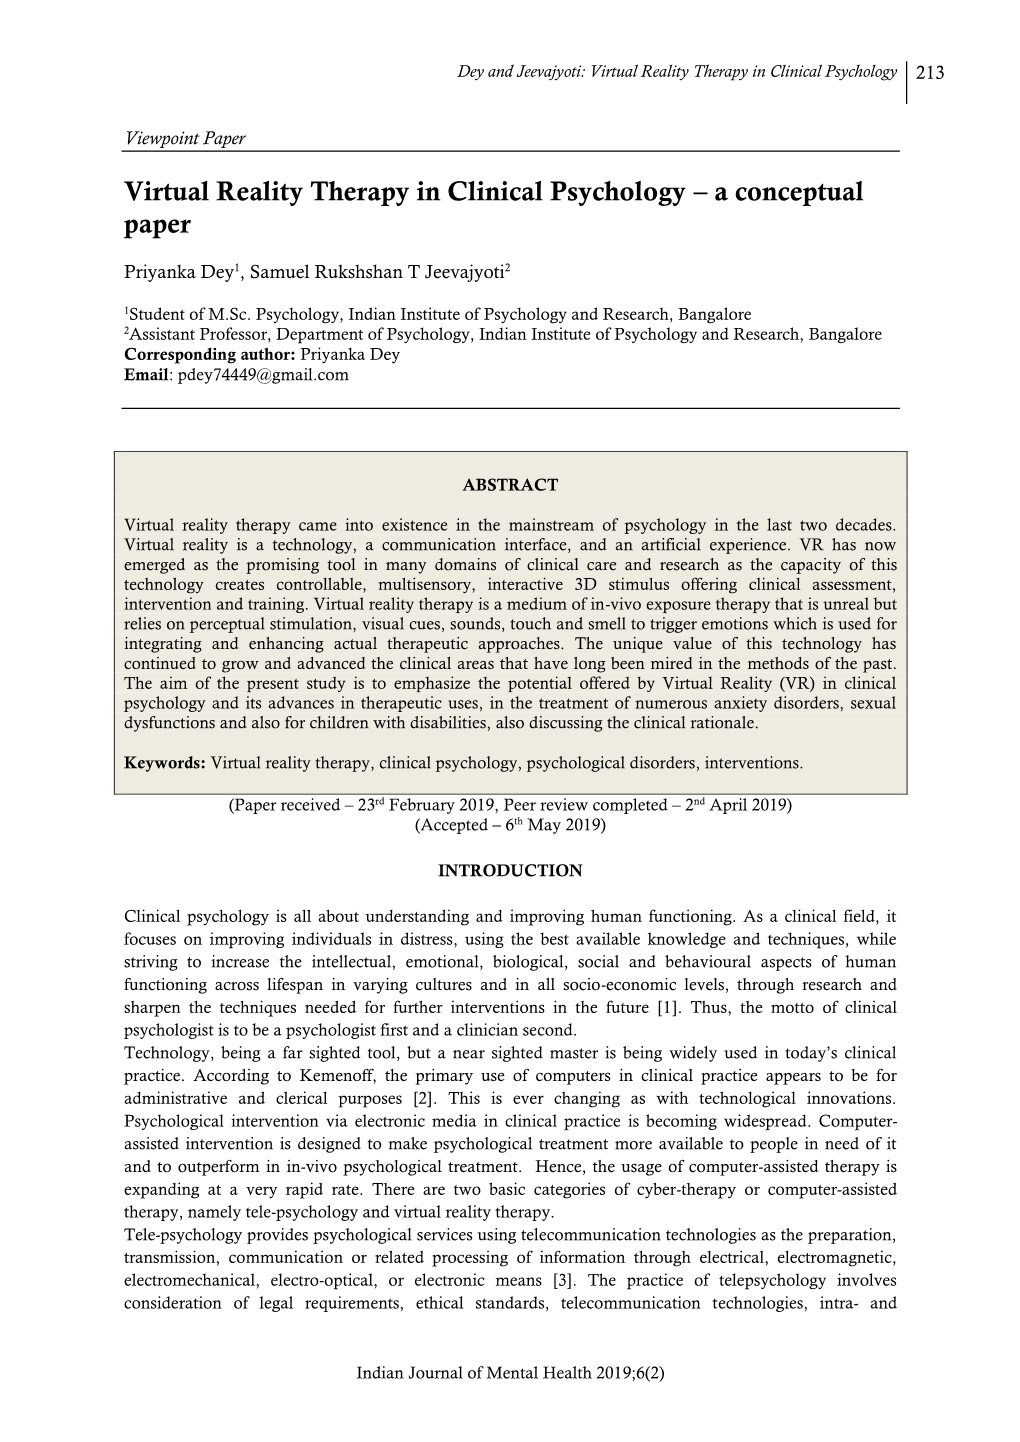 Virtual Reality Therapy in Clinical Psychology – a Conceptual Paper